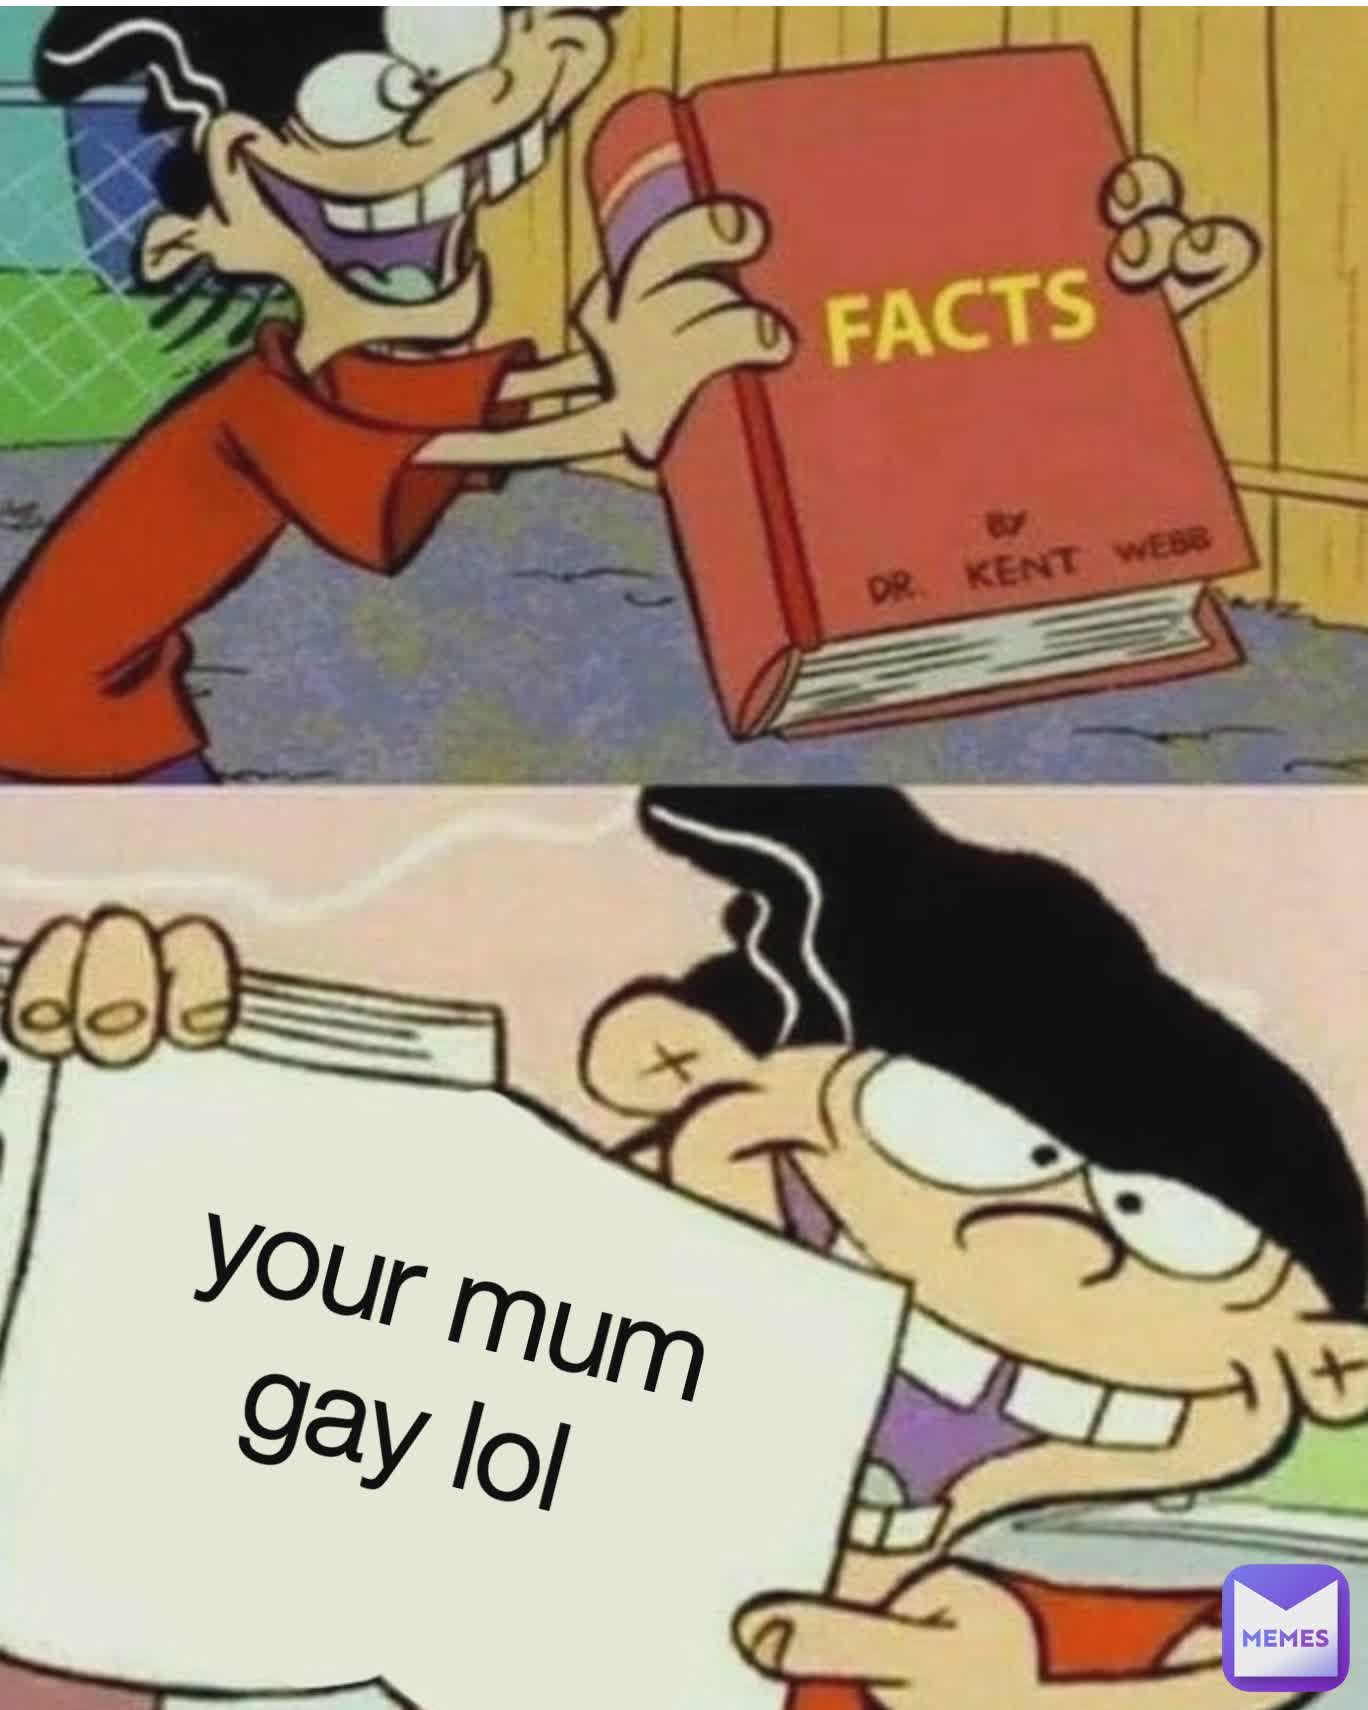 Type Text your mum gay lol 